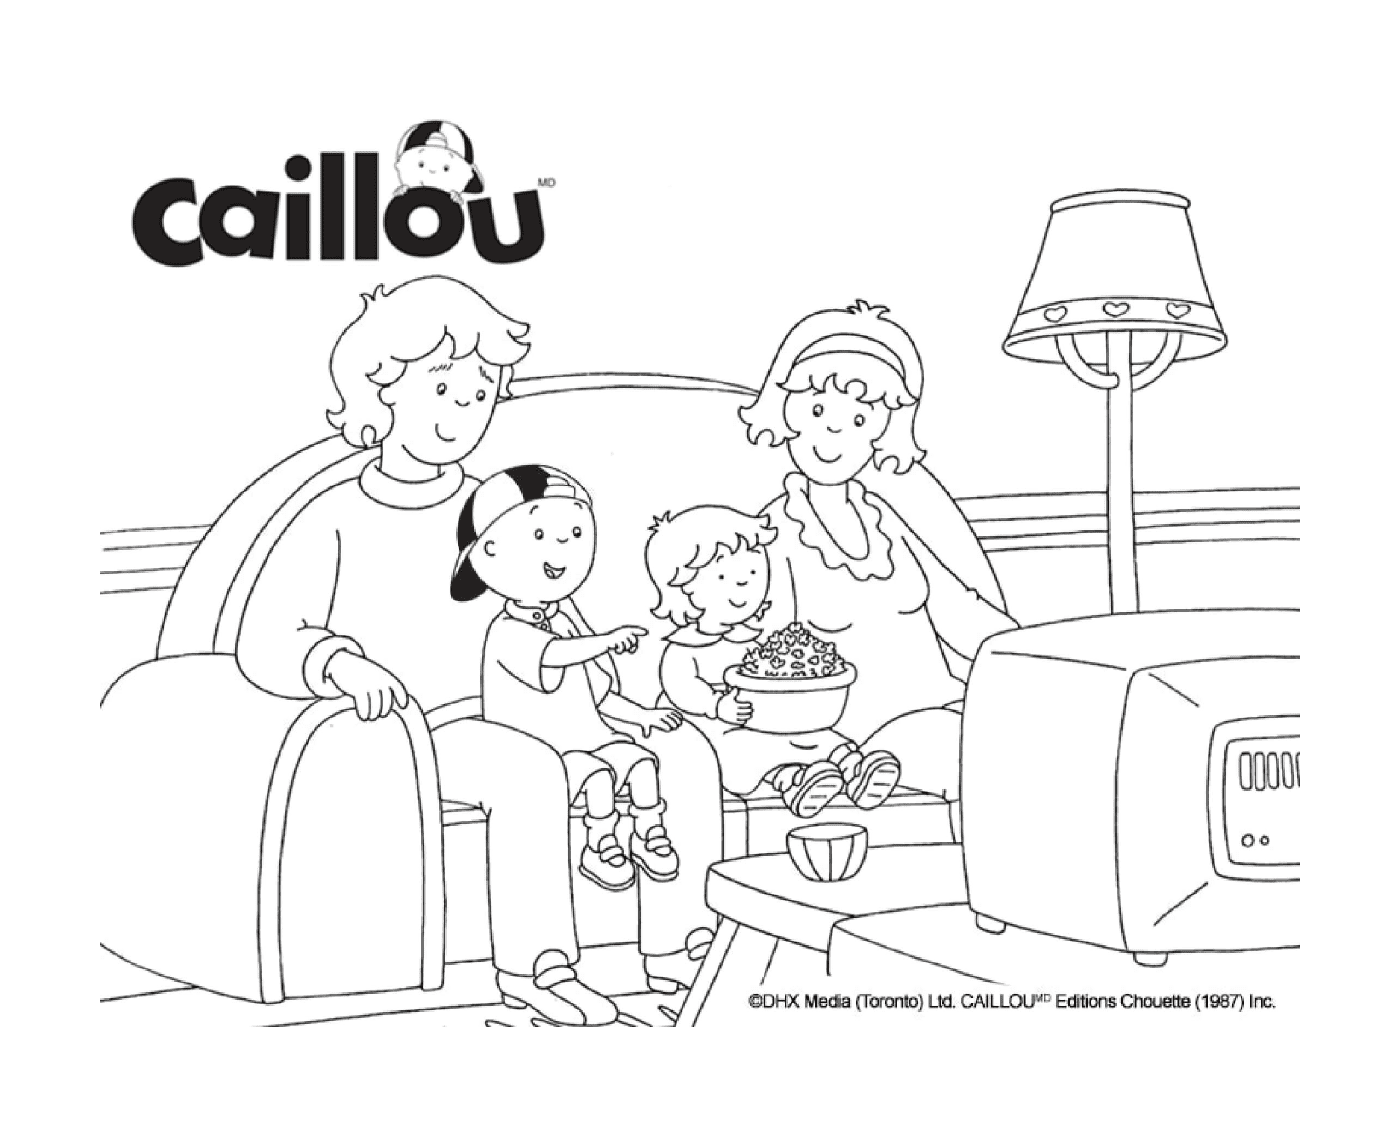  The Caillou family is watching a movie on television 